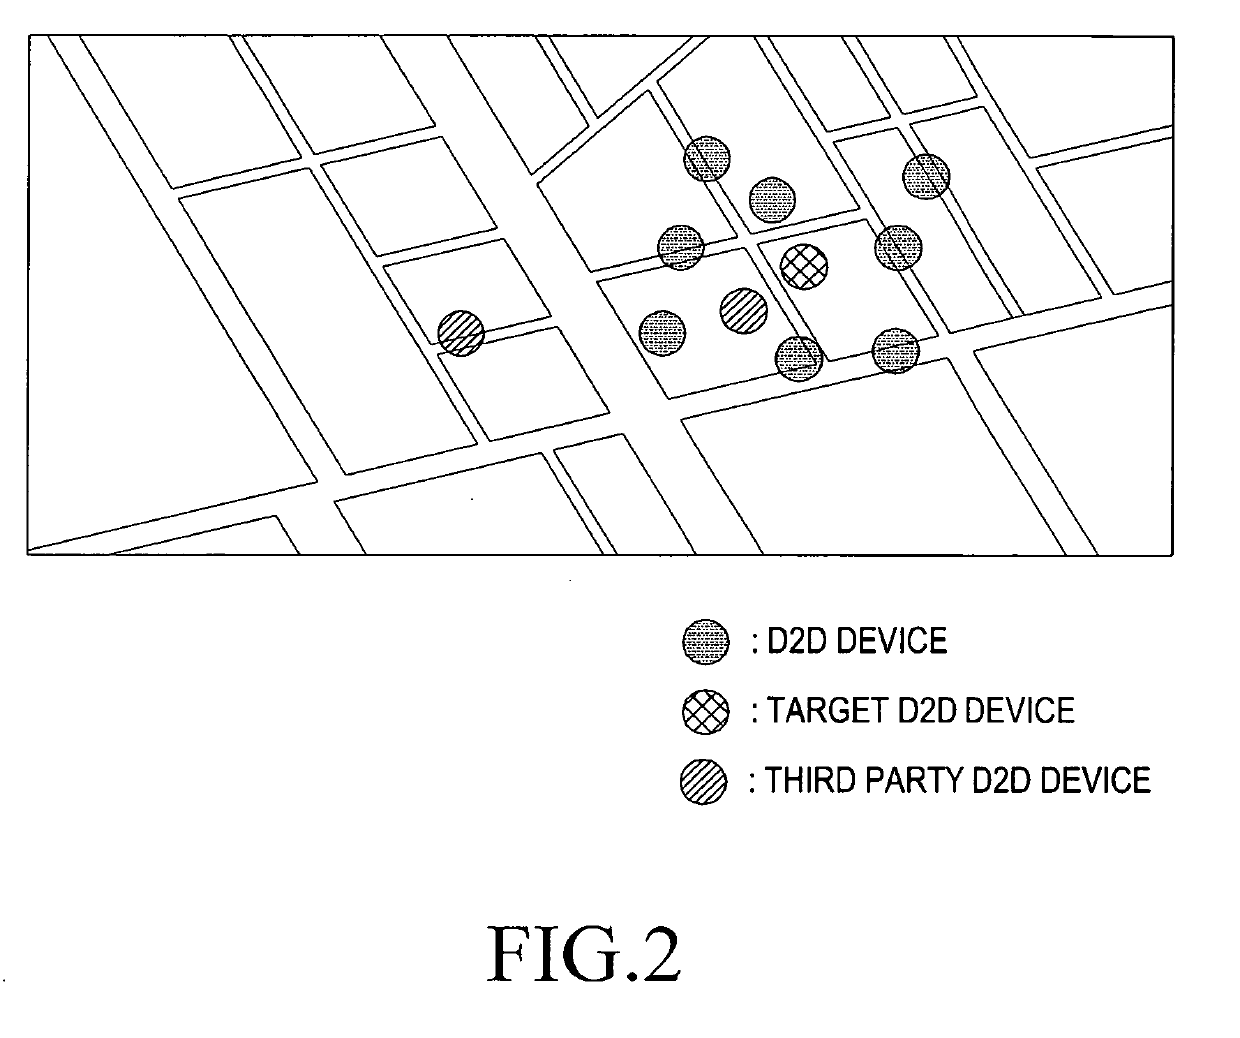 Location detection apparatus and method in communication system supporting device-to-device scheme